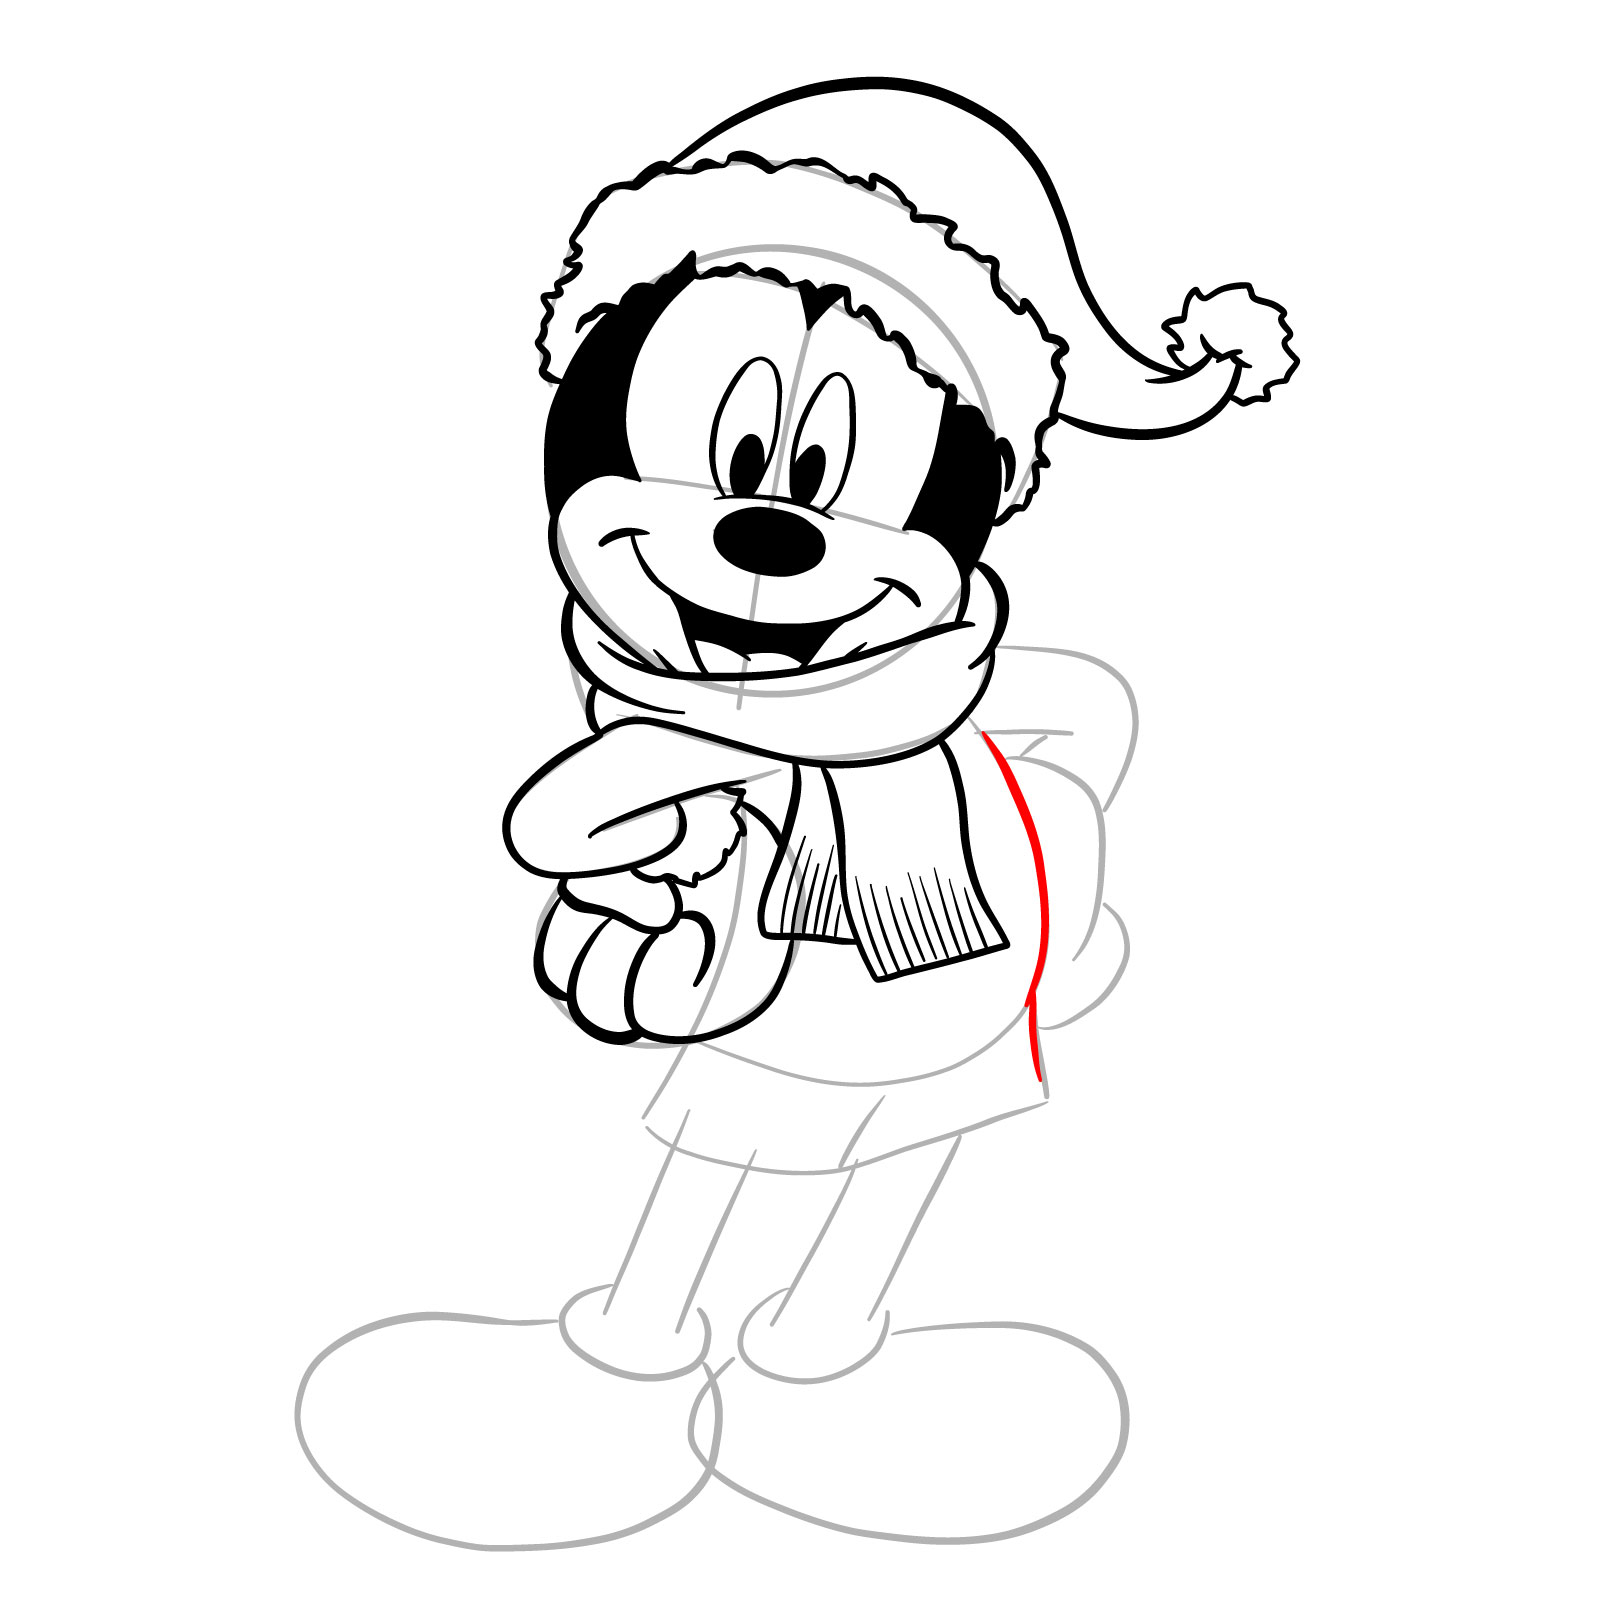 How to draw Santa Mickey Mouse - step 23